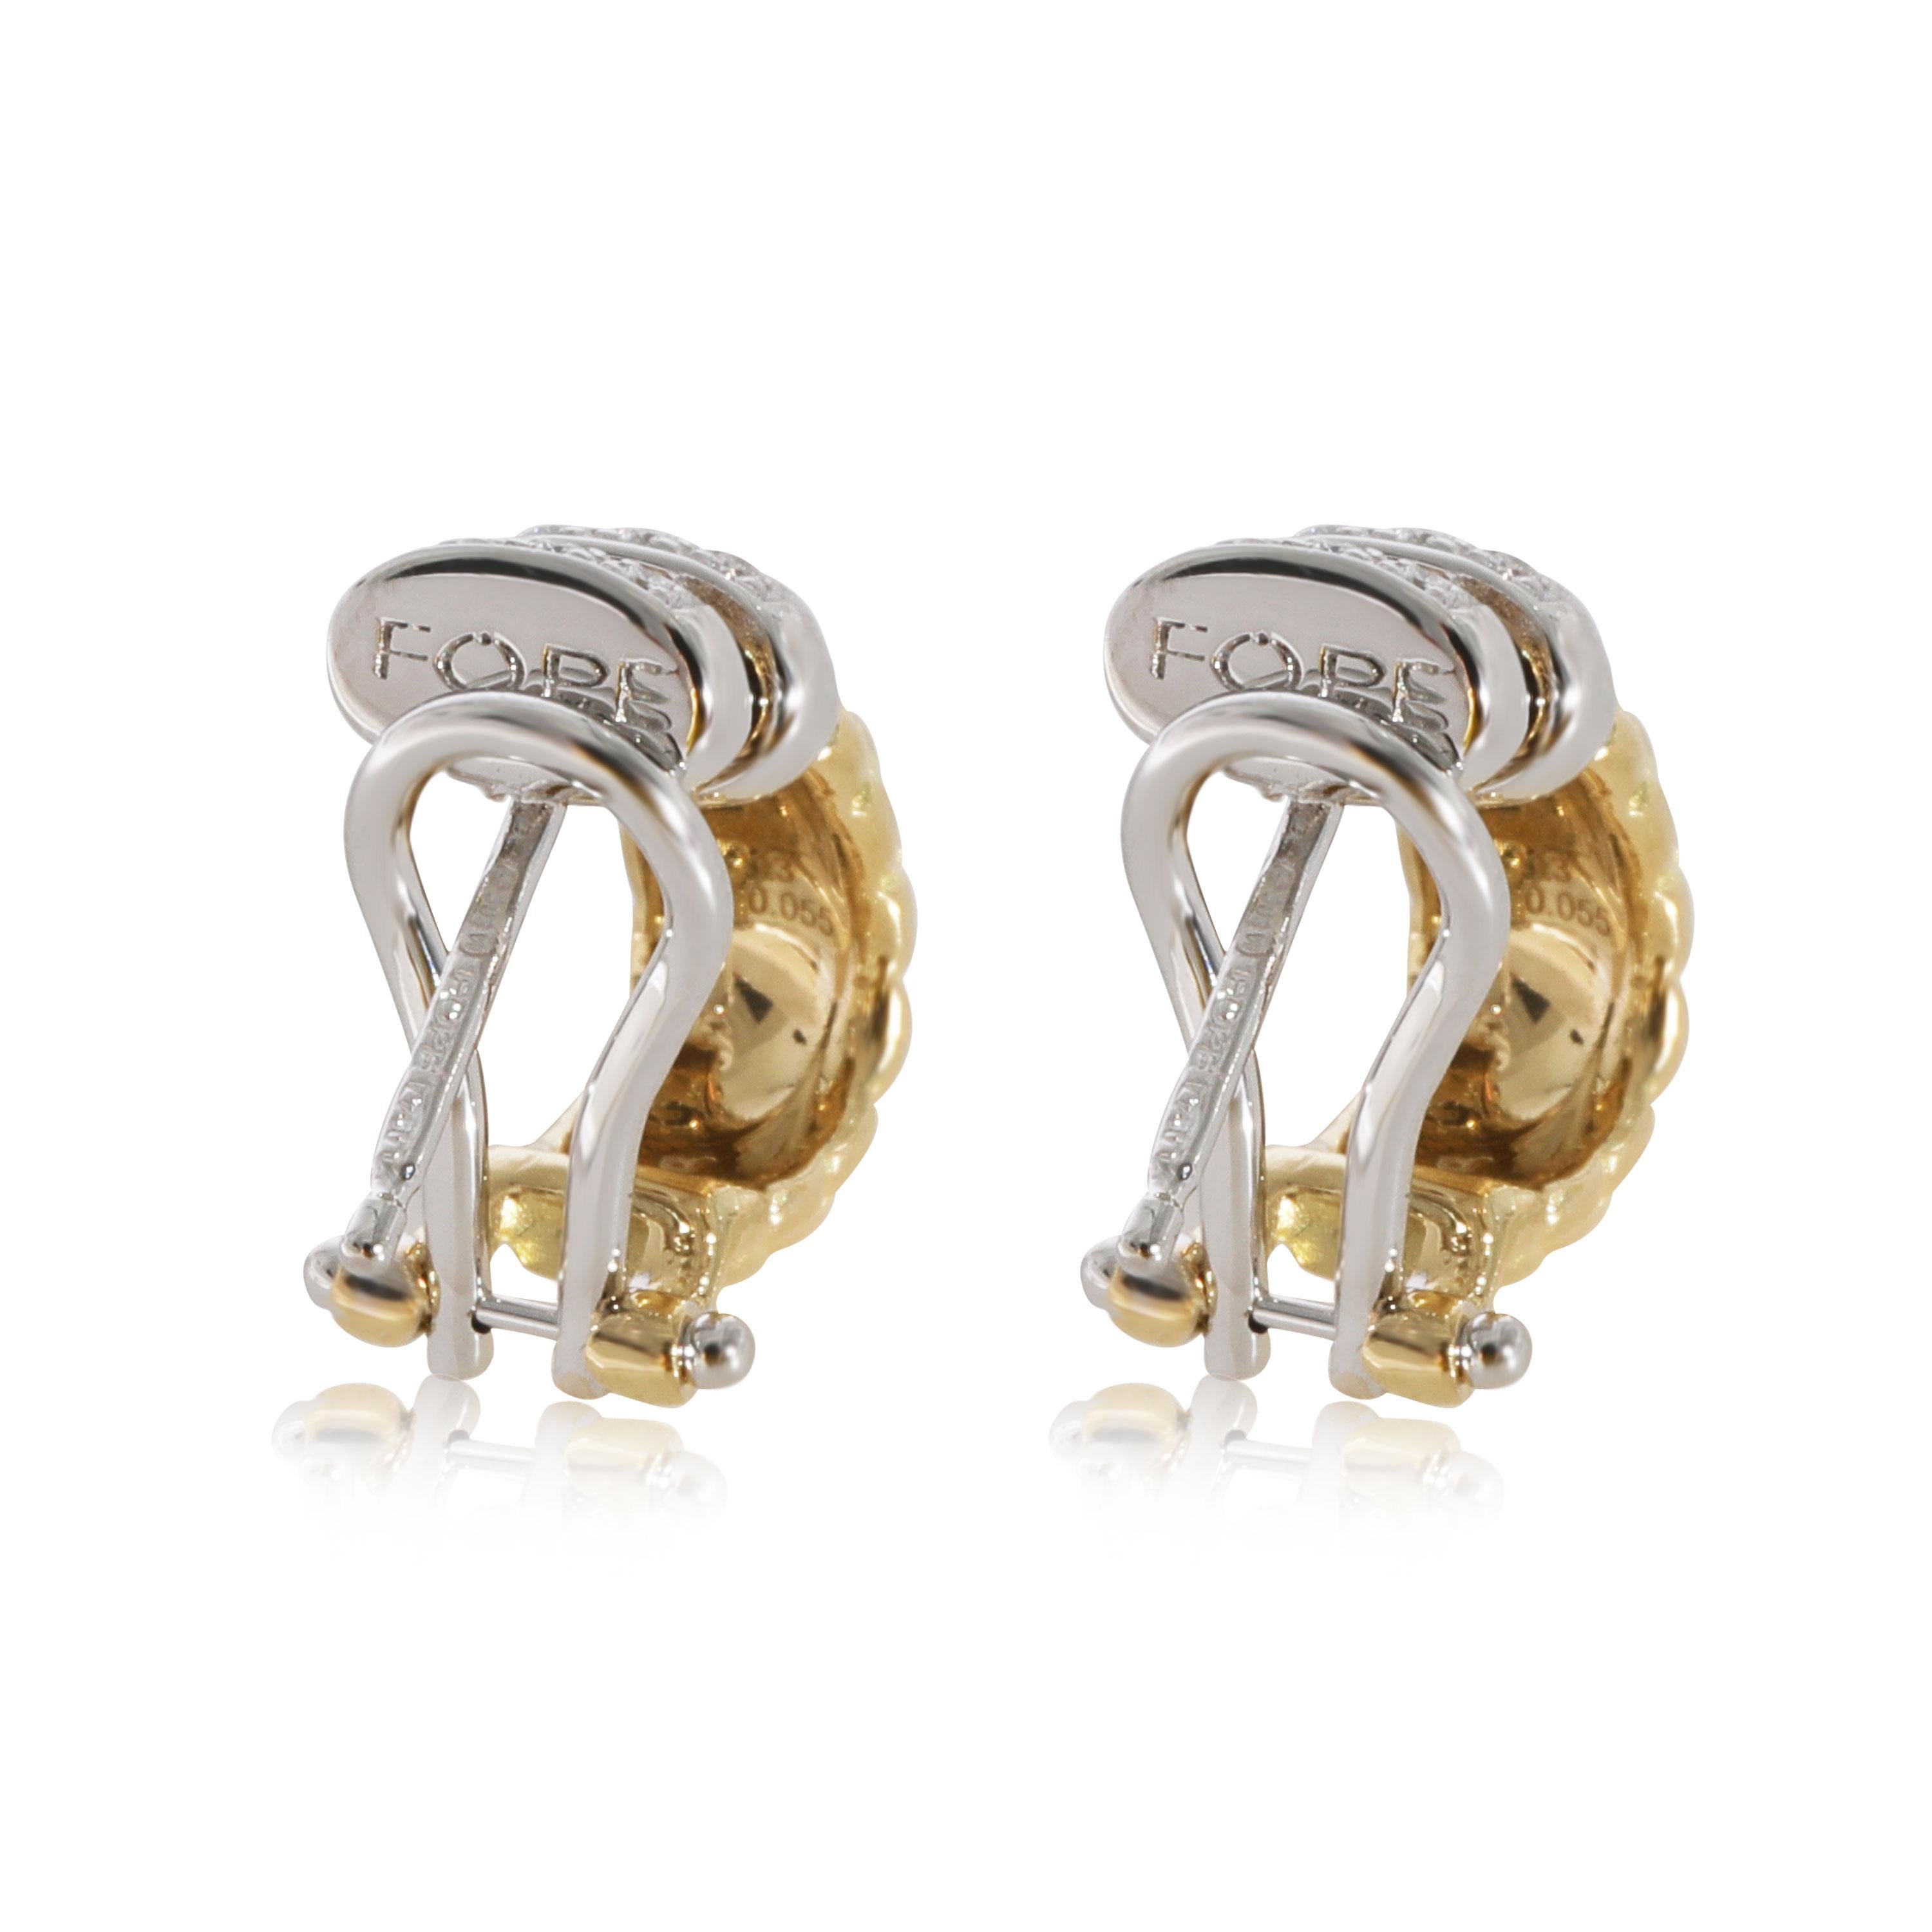 FOPE Hoop Earring in 18k White Gold/Yellow Gold 0.11 CTW

PRIMARY DETAILS
SKU: 127468
Listing Title: FOPE Hoop Earring in 18k White Gold/Yellow Gold 0.11 CTW
Condition Description: Retails for 4250 USD. In excellent condition and recently